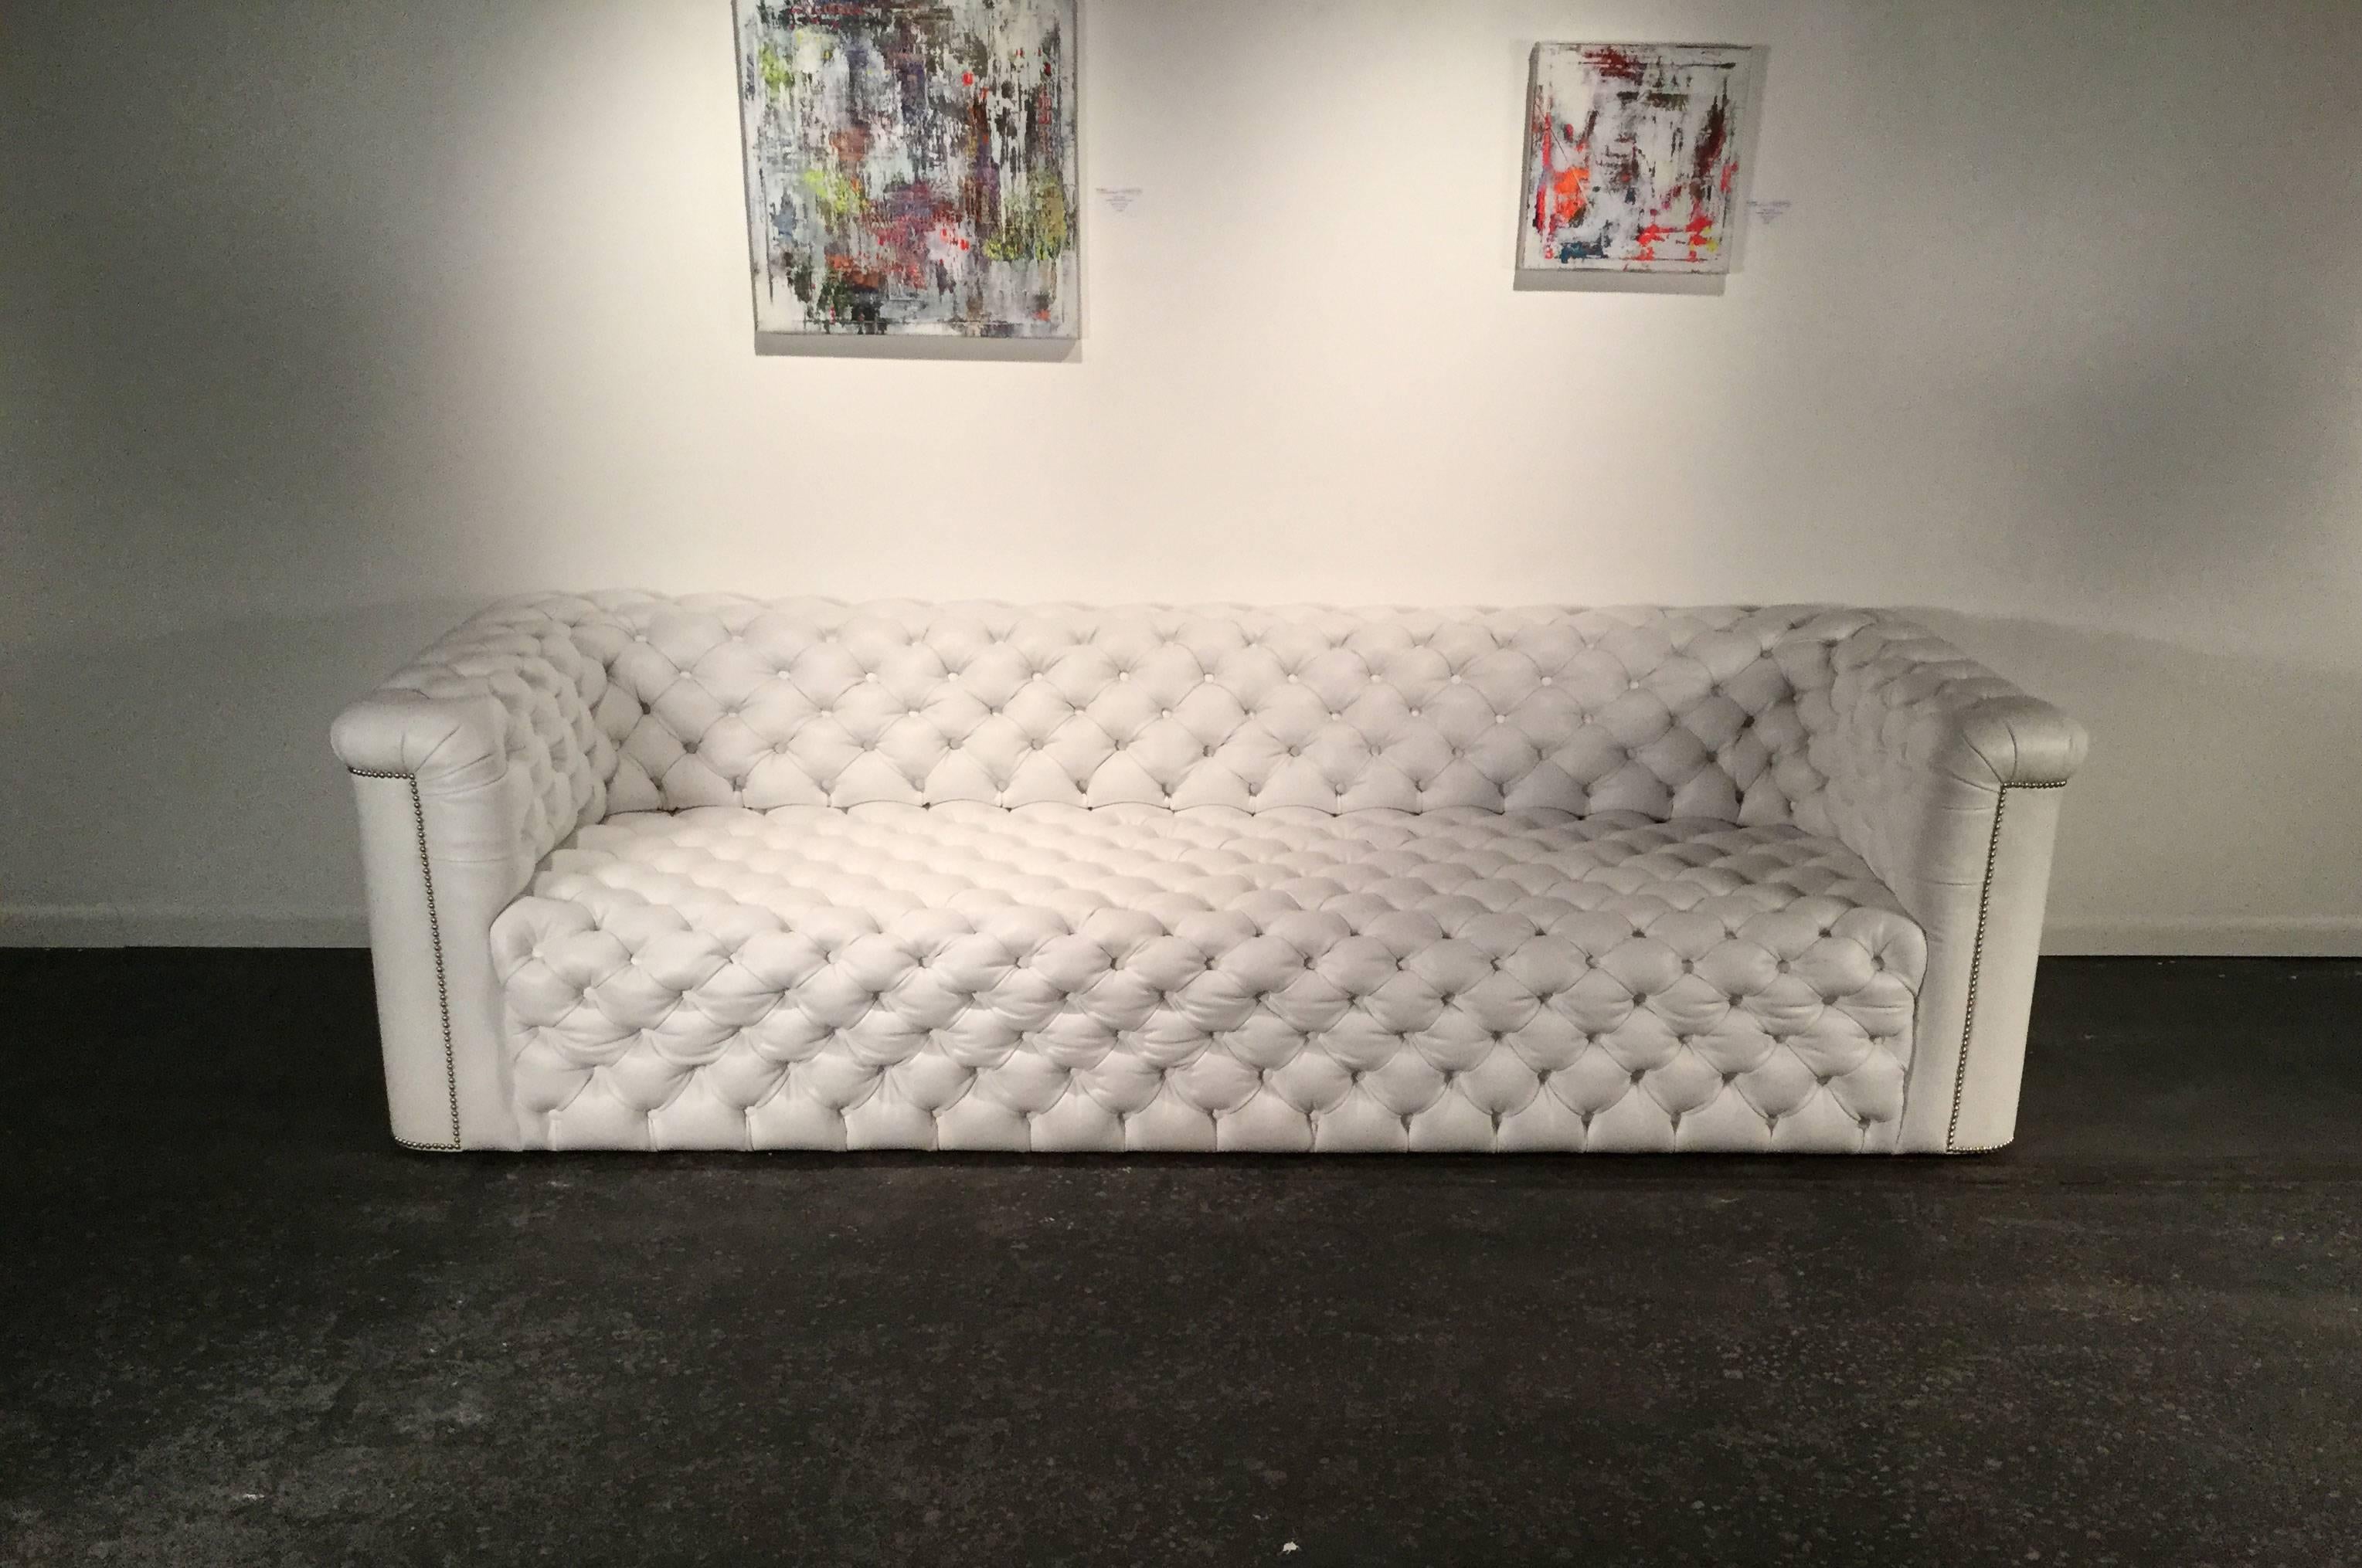 Modern Chesterfield sofa. Amazing tight button tufting with squared off arms and backrest. Nickel nailhead detail all in white leather.